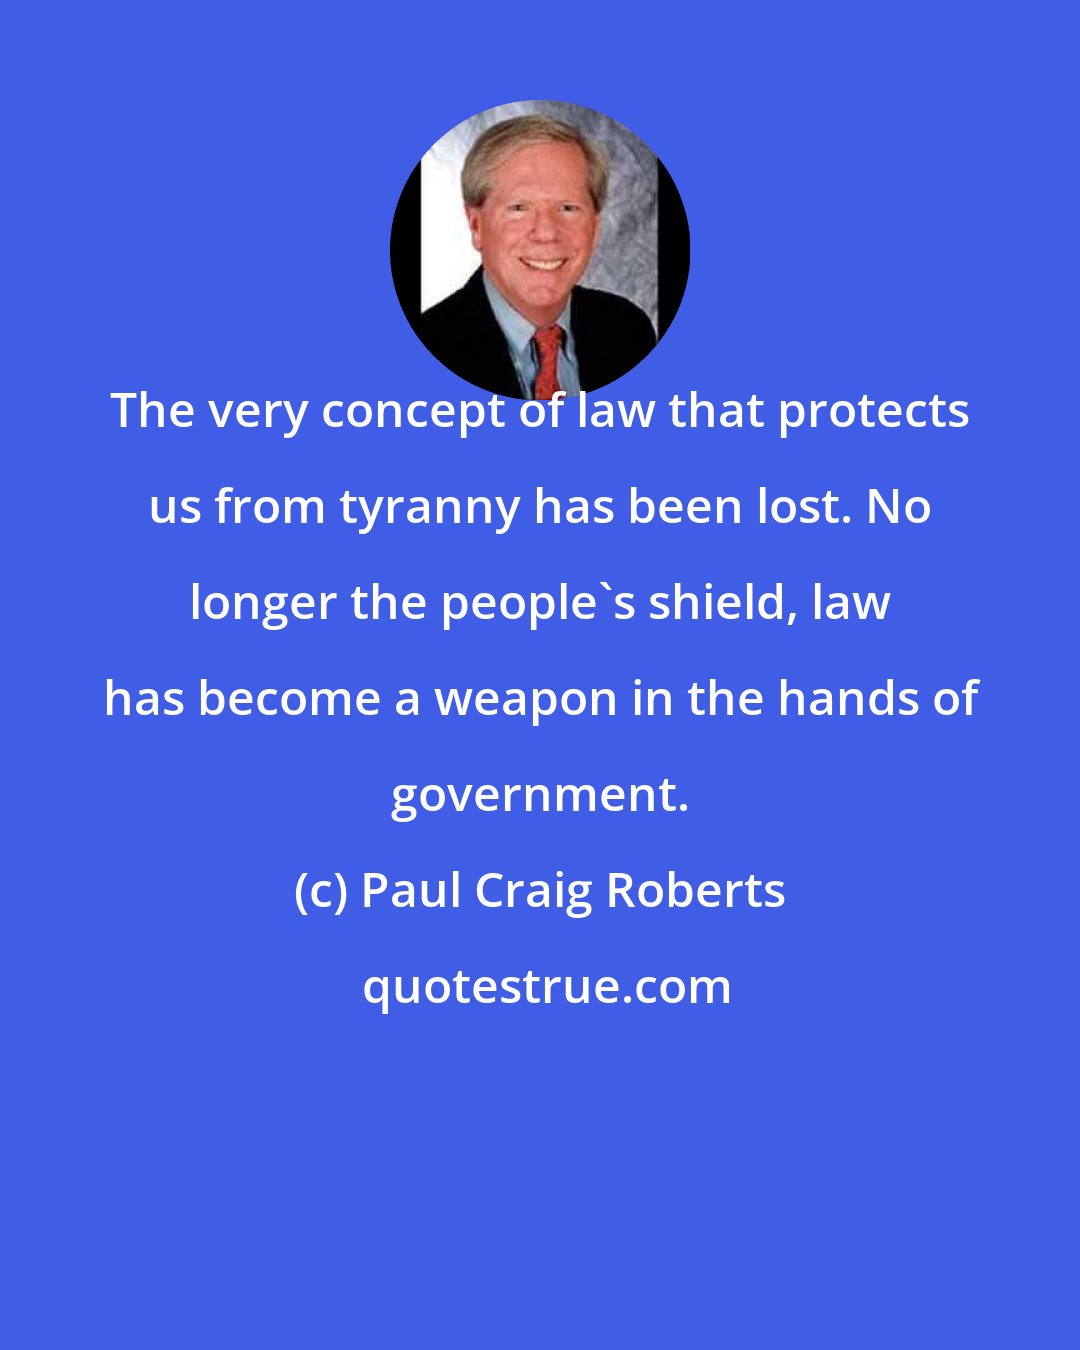 Paul Craig Roberts: The very concept of law that protects us from tyranny has been lost. No longer the people's shield, law has become a weapon in the hands of government.